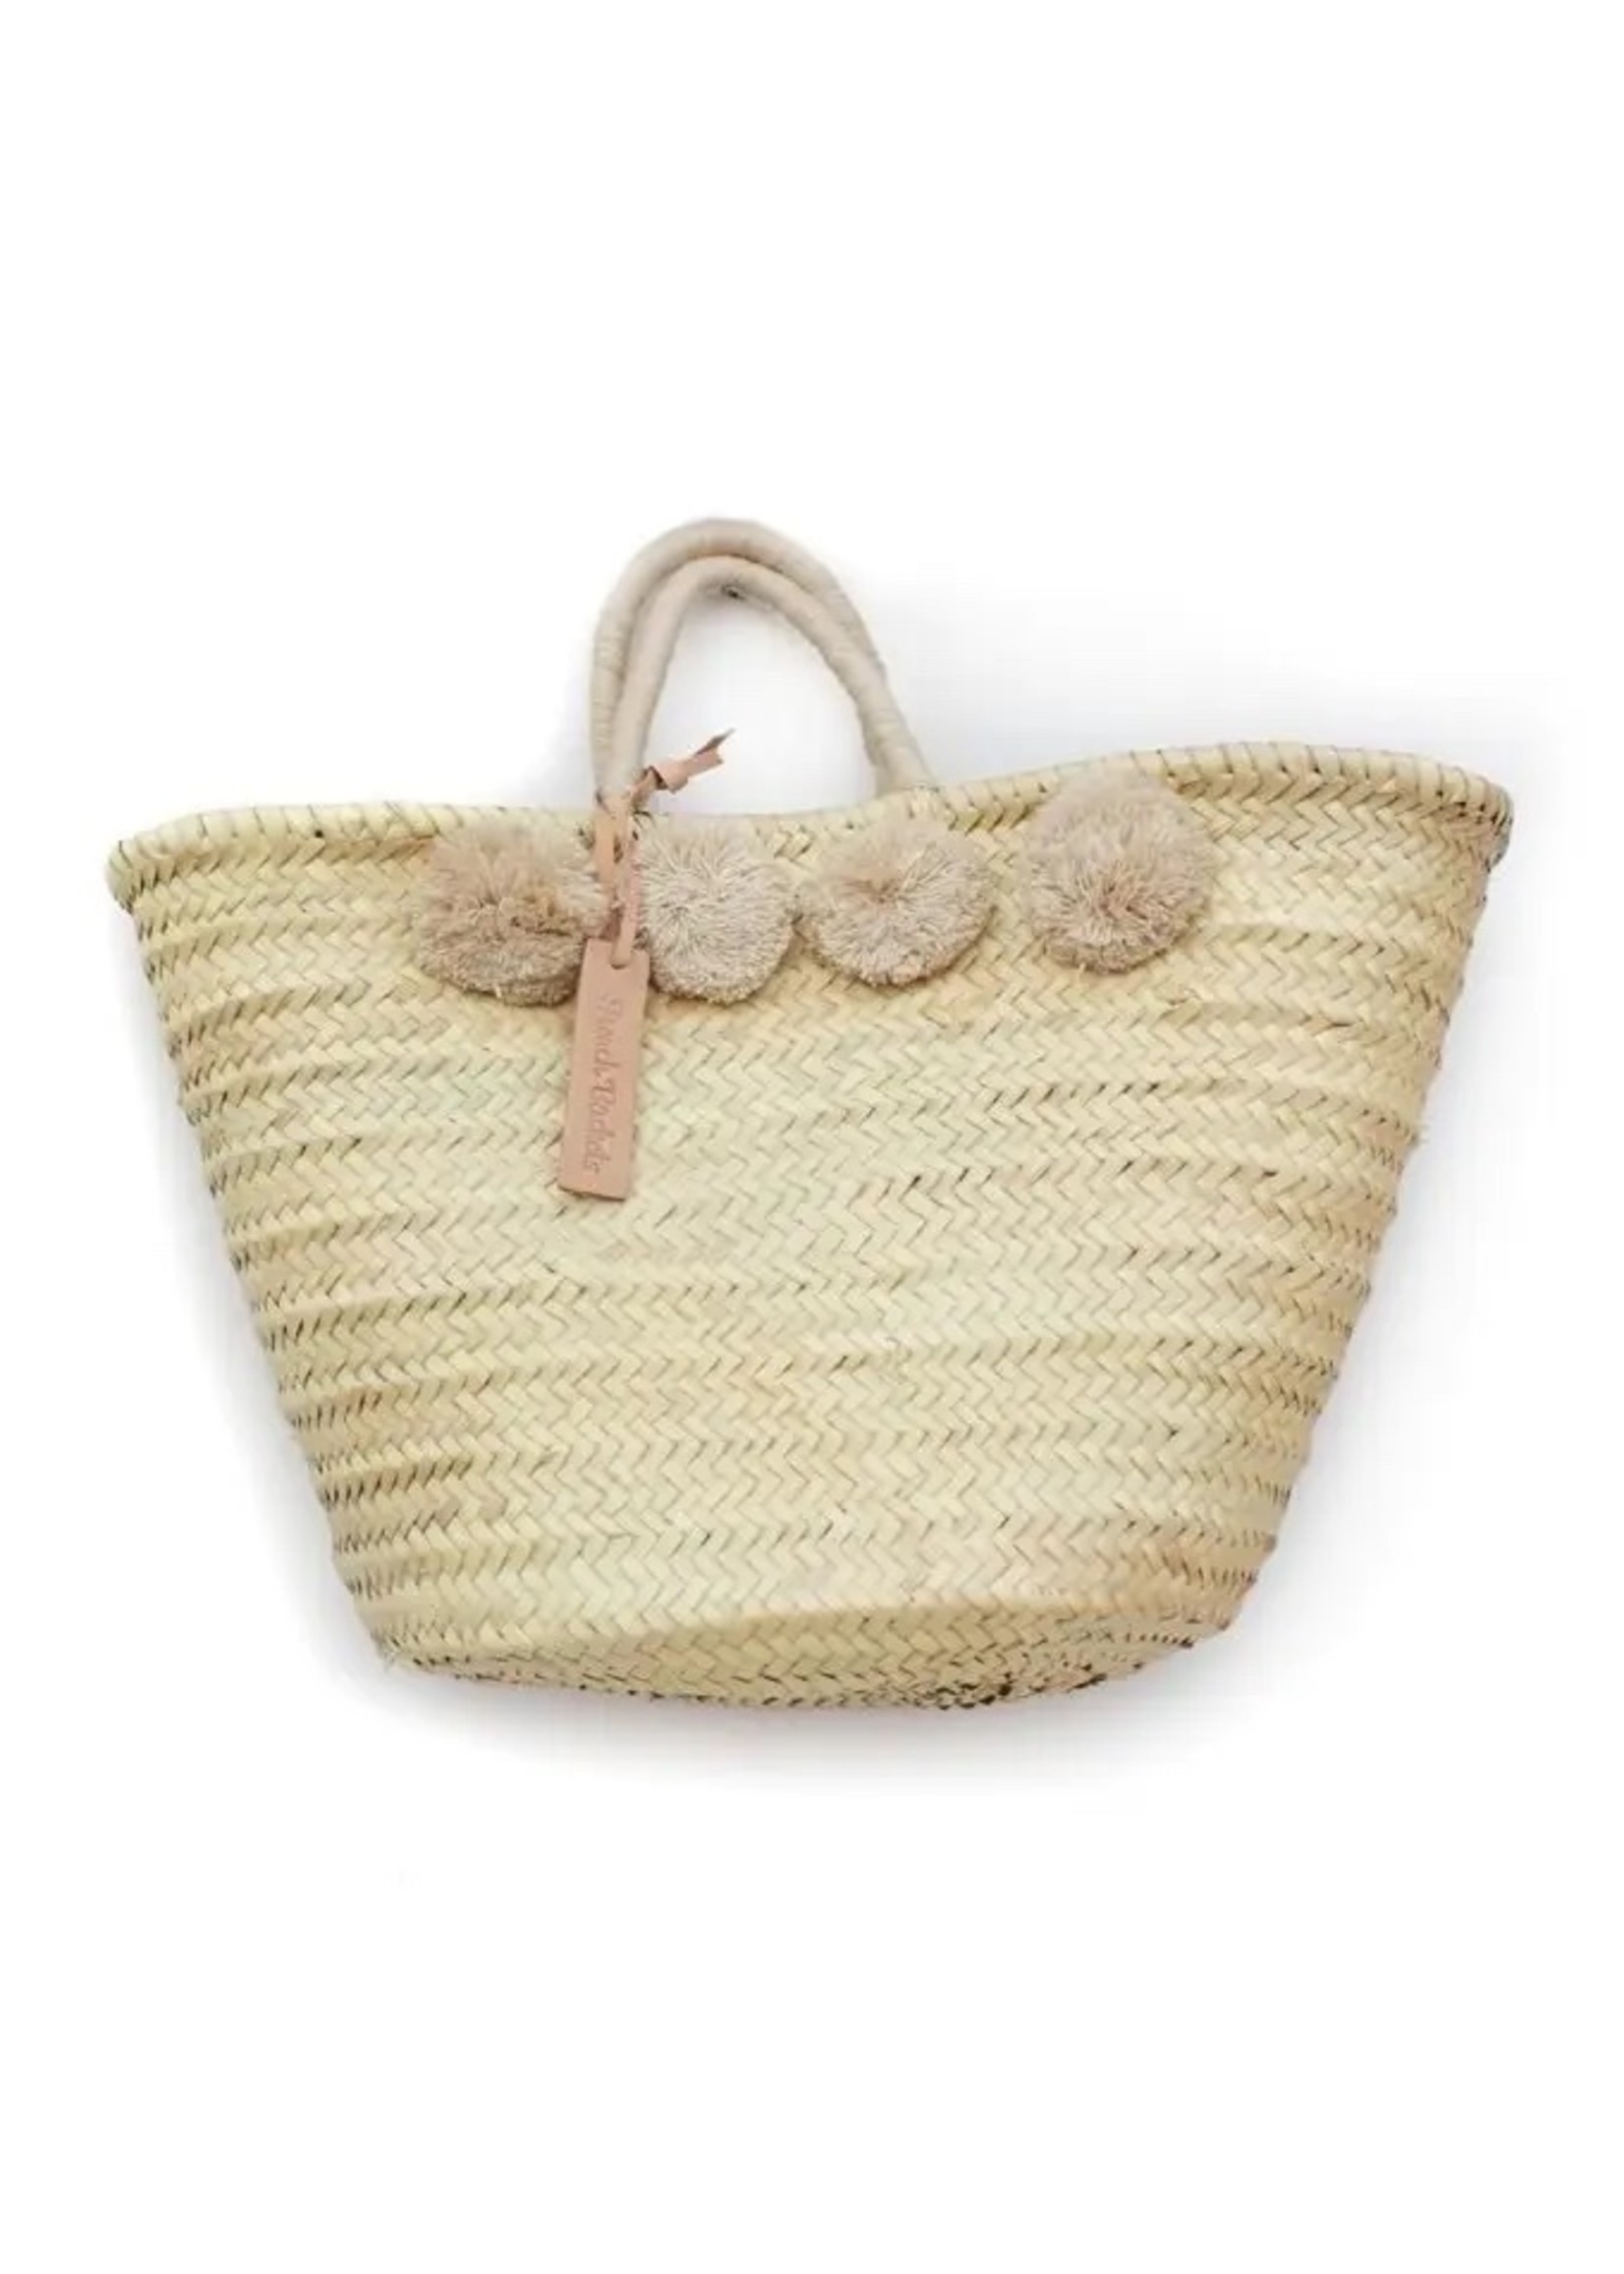 French Market Tote - The Cote d’Azur